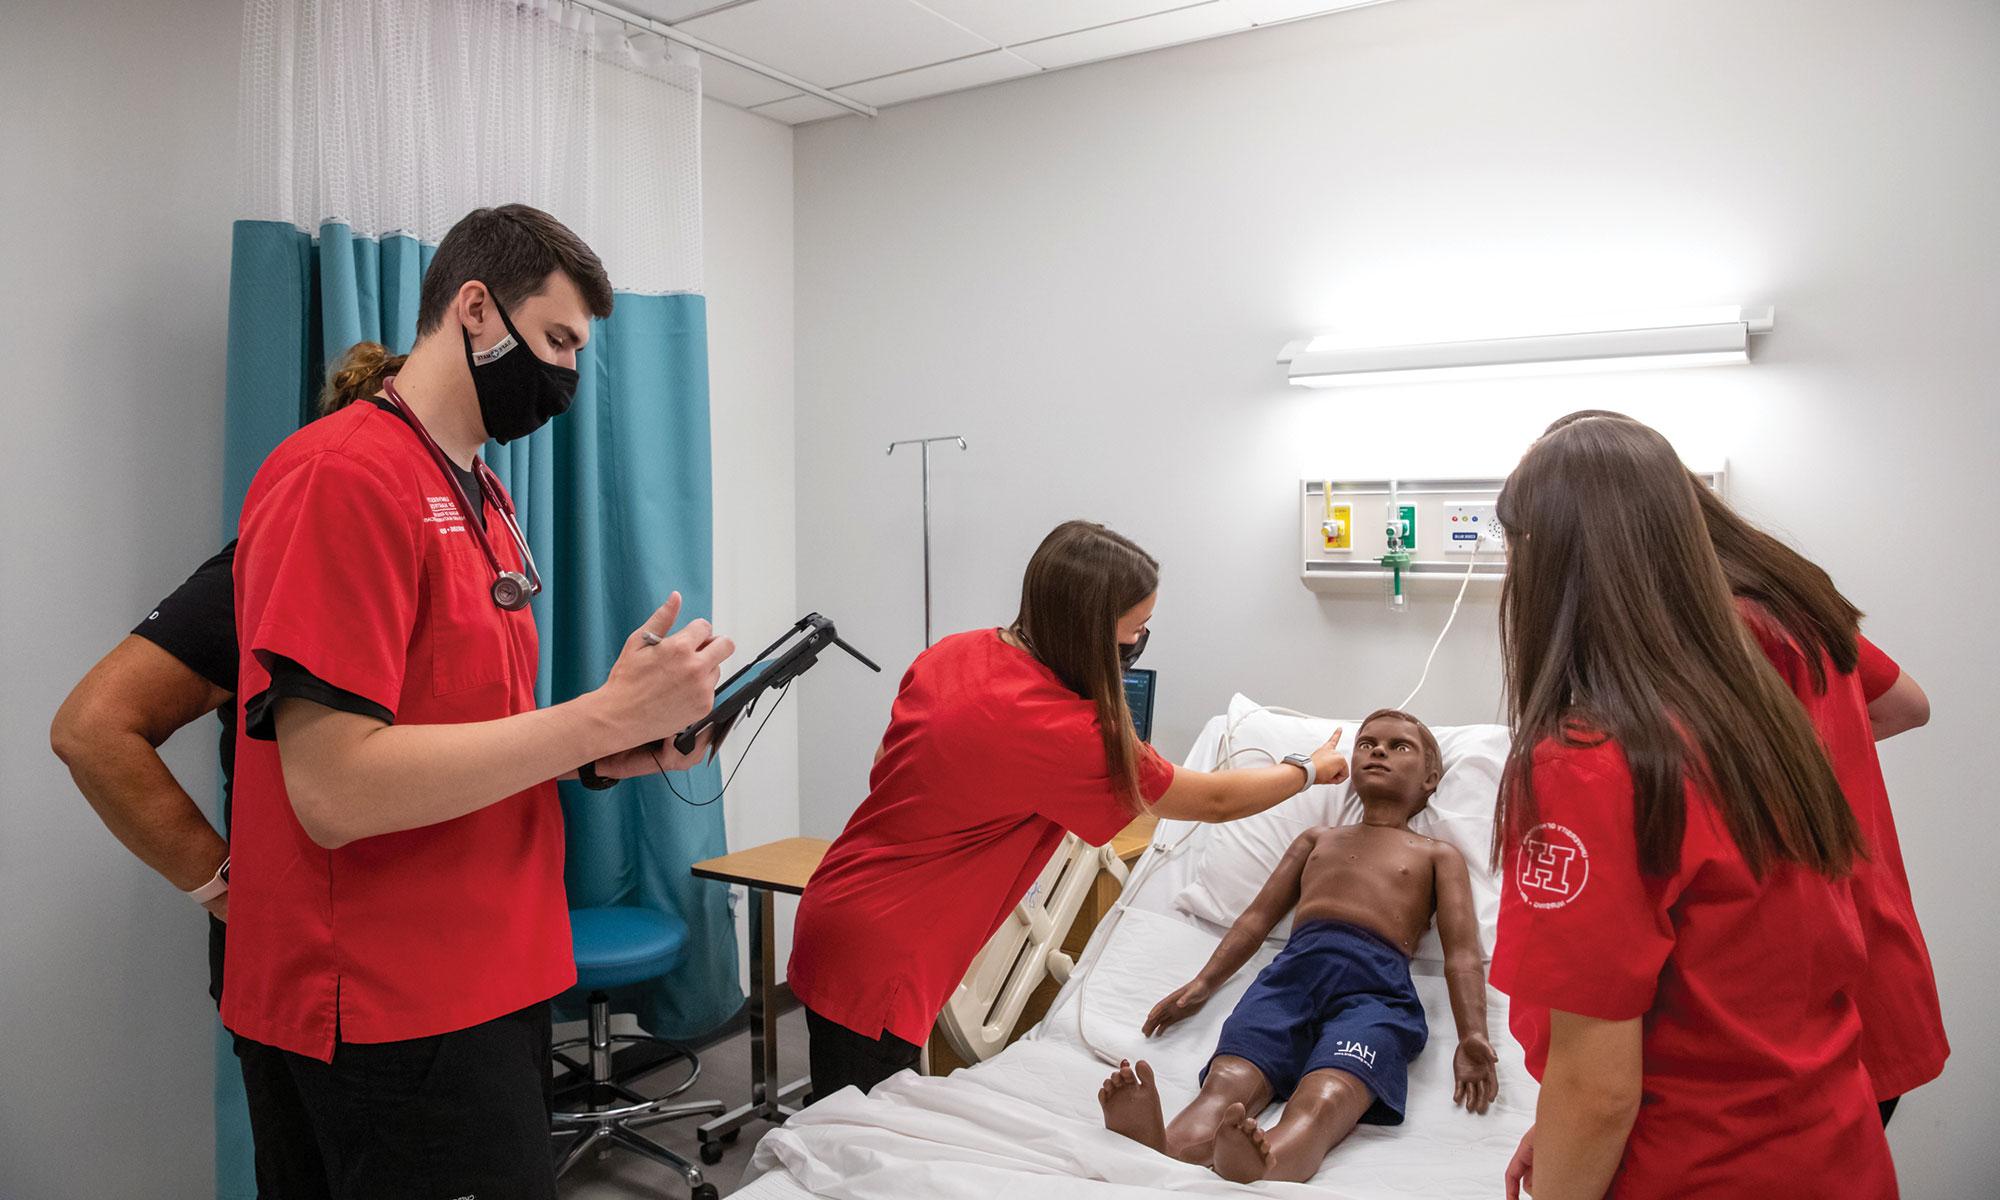 Students in the nursing simulation lab